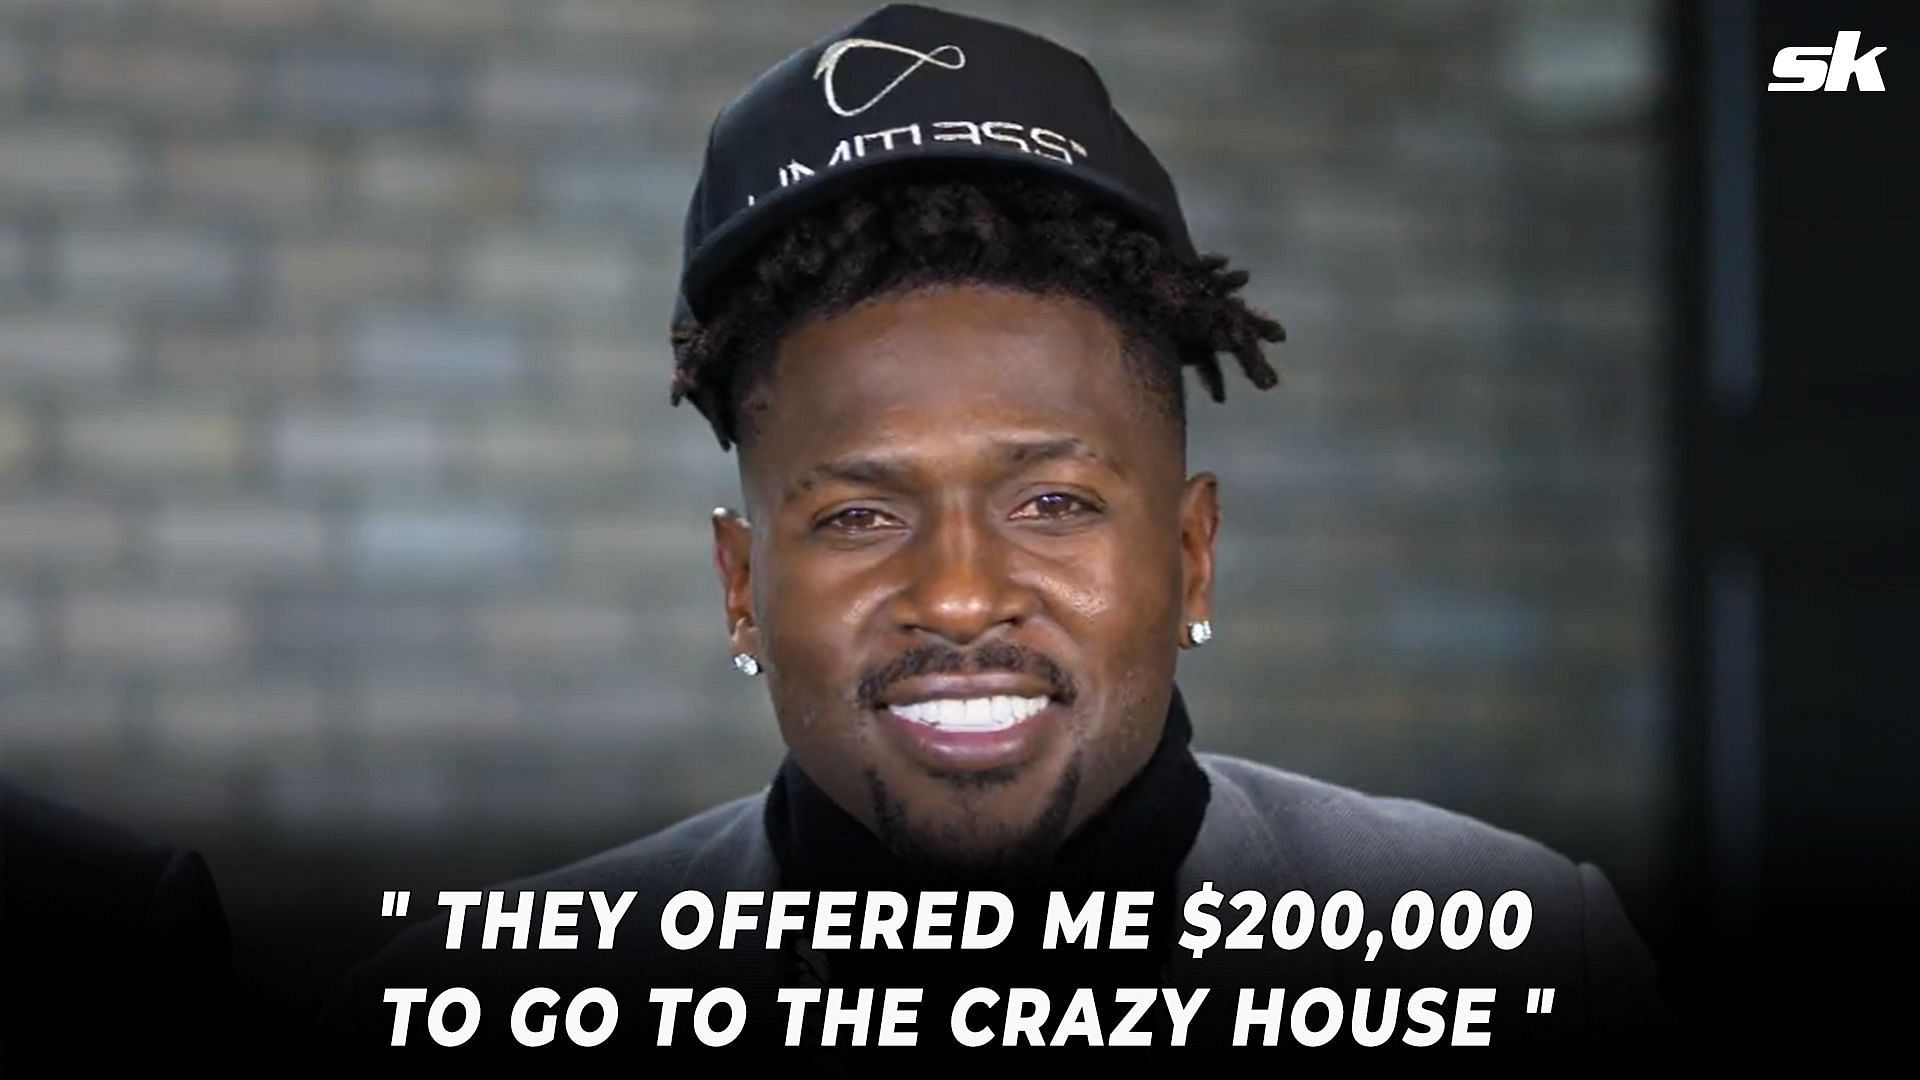 Antonio Brown stated: &quot;They offered me $200,00 to go to the crazy house.&quot;